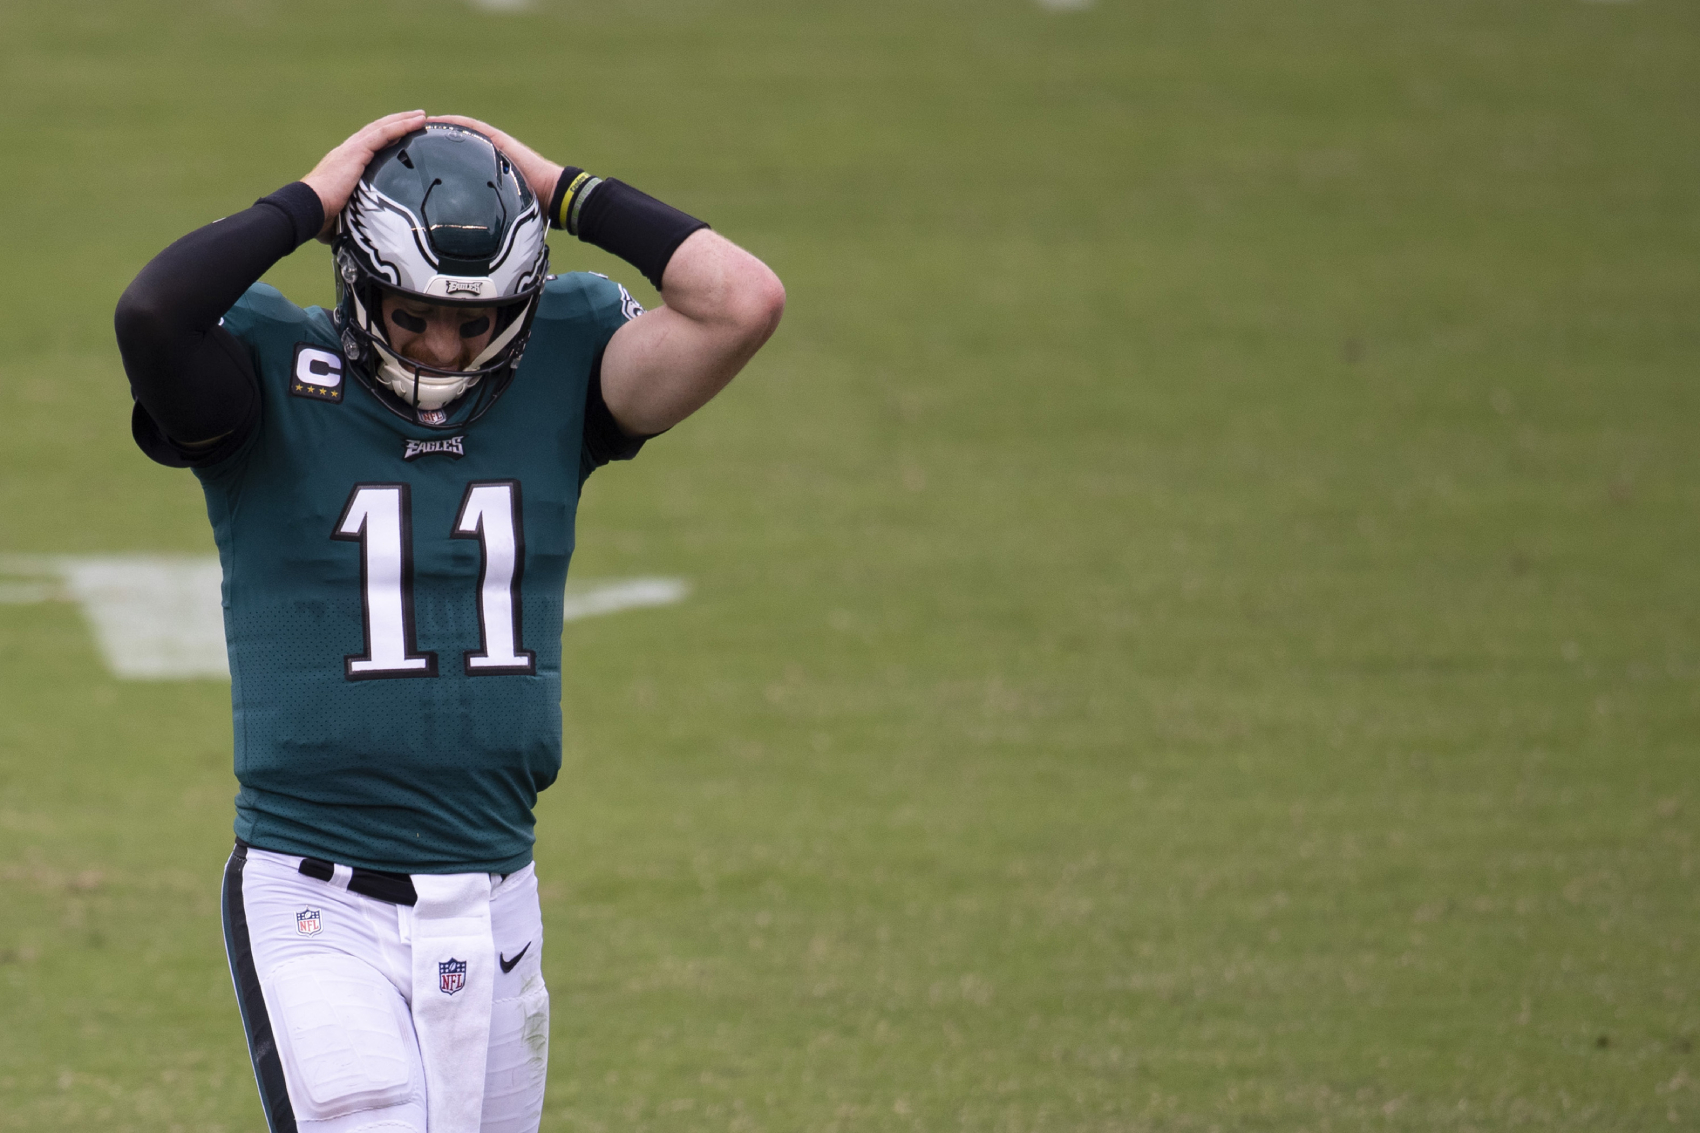 Carson Wentz has already struggled this season for the Philadelphia Eagles. Now, a COVID-19 issue could spell doom for him on Sunday.